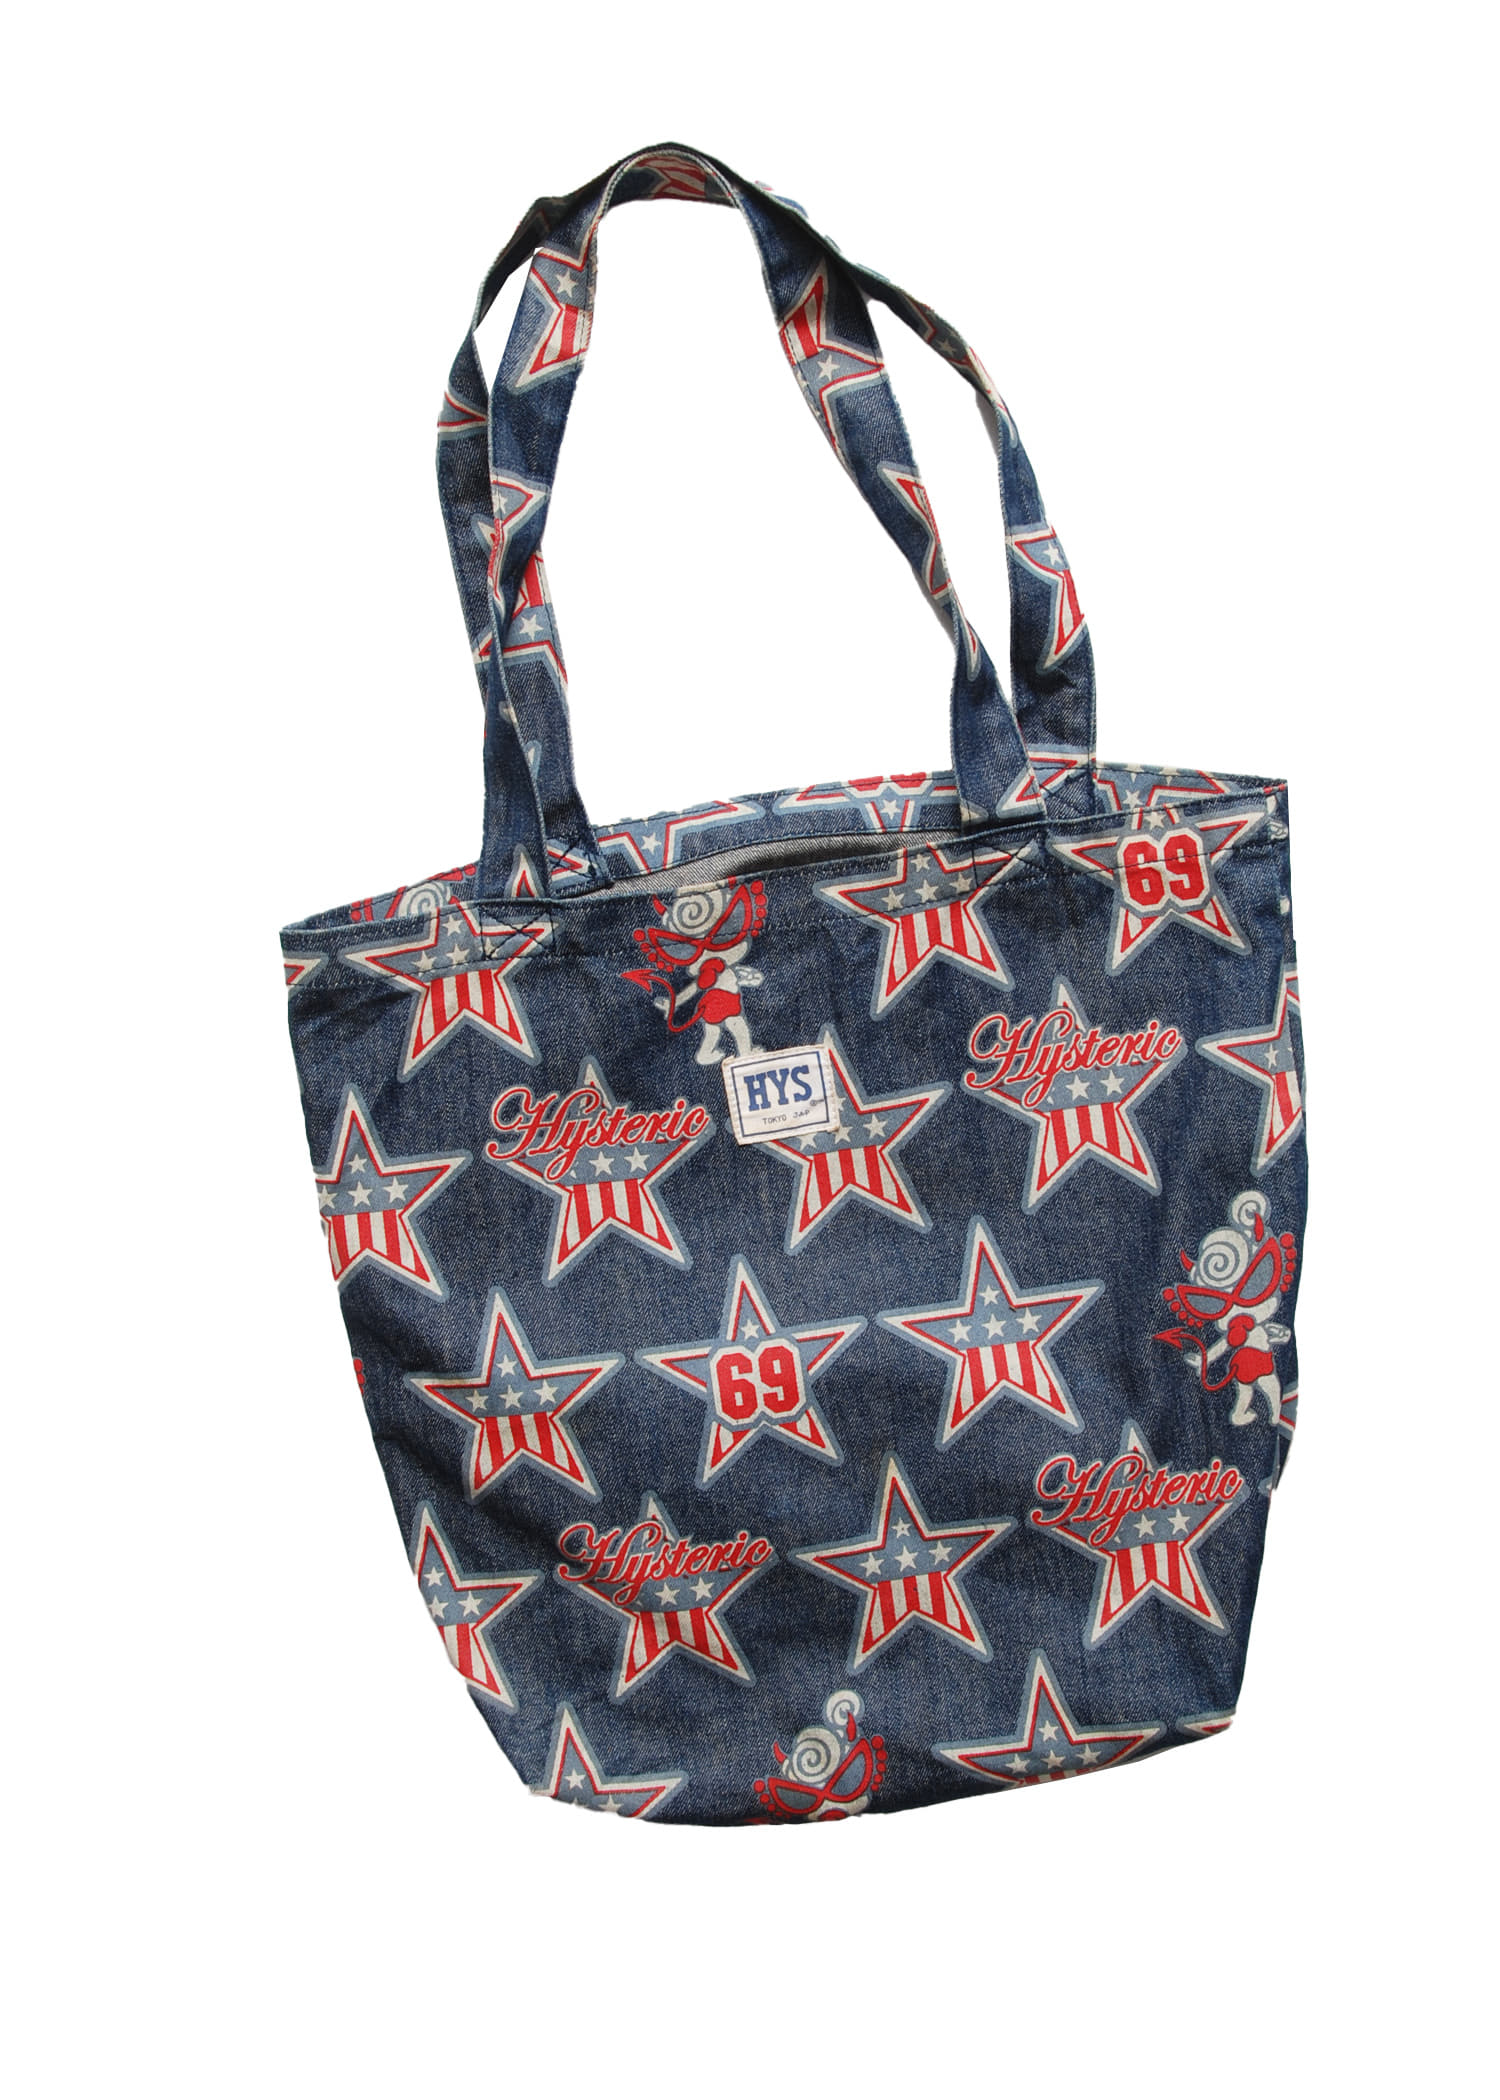 Hysteric glamour tote bag